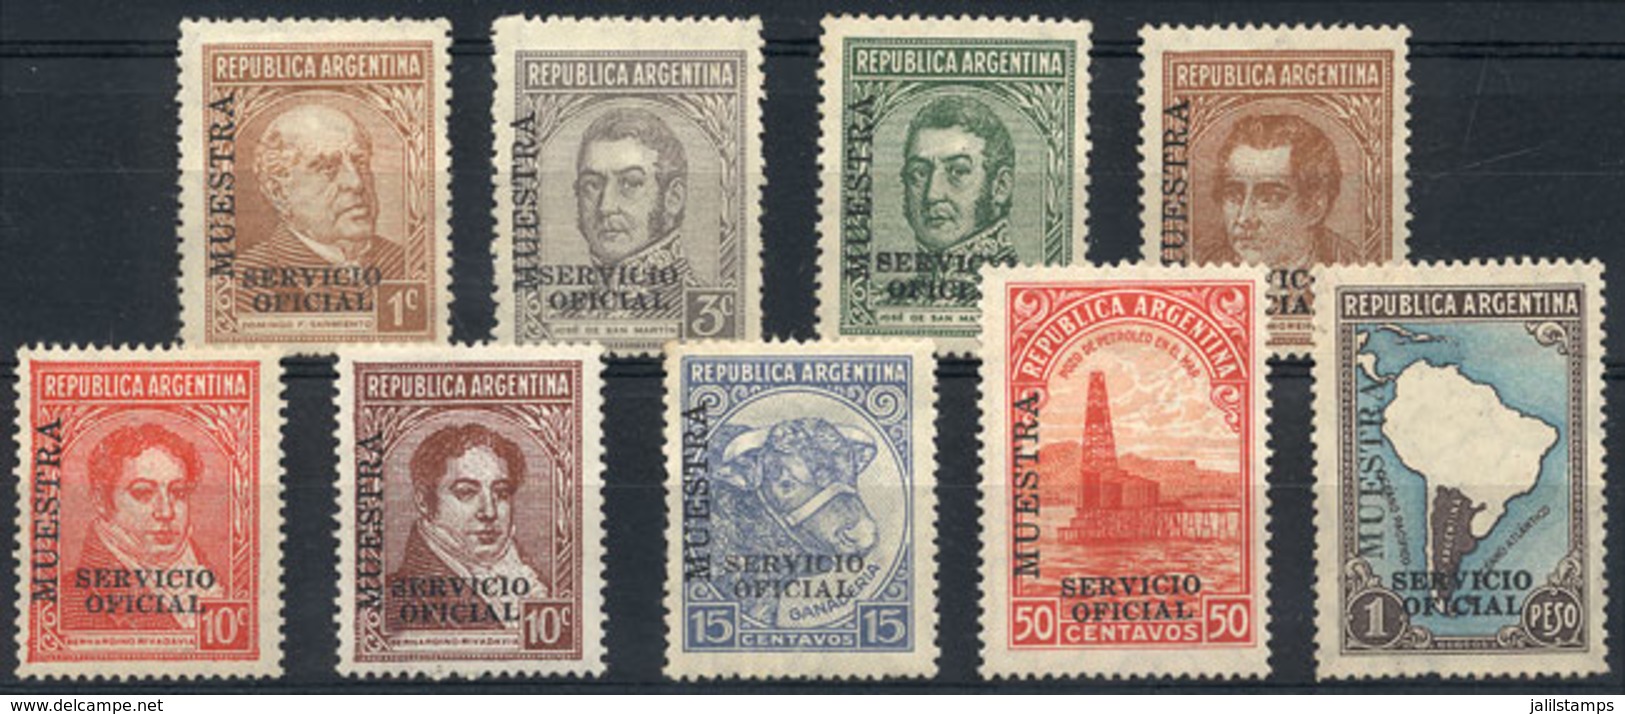 ARGENTINA: GJ.630 + Other Values, 9 Stamps Of The Proceres & Riquezas I Issue With MUESTRA Ovpt, VF Quality, Rare! - Dienstmarken